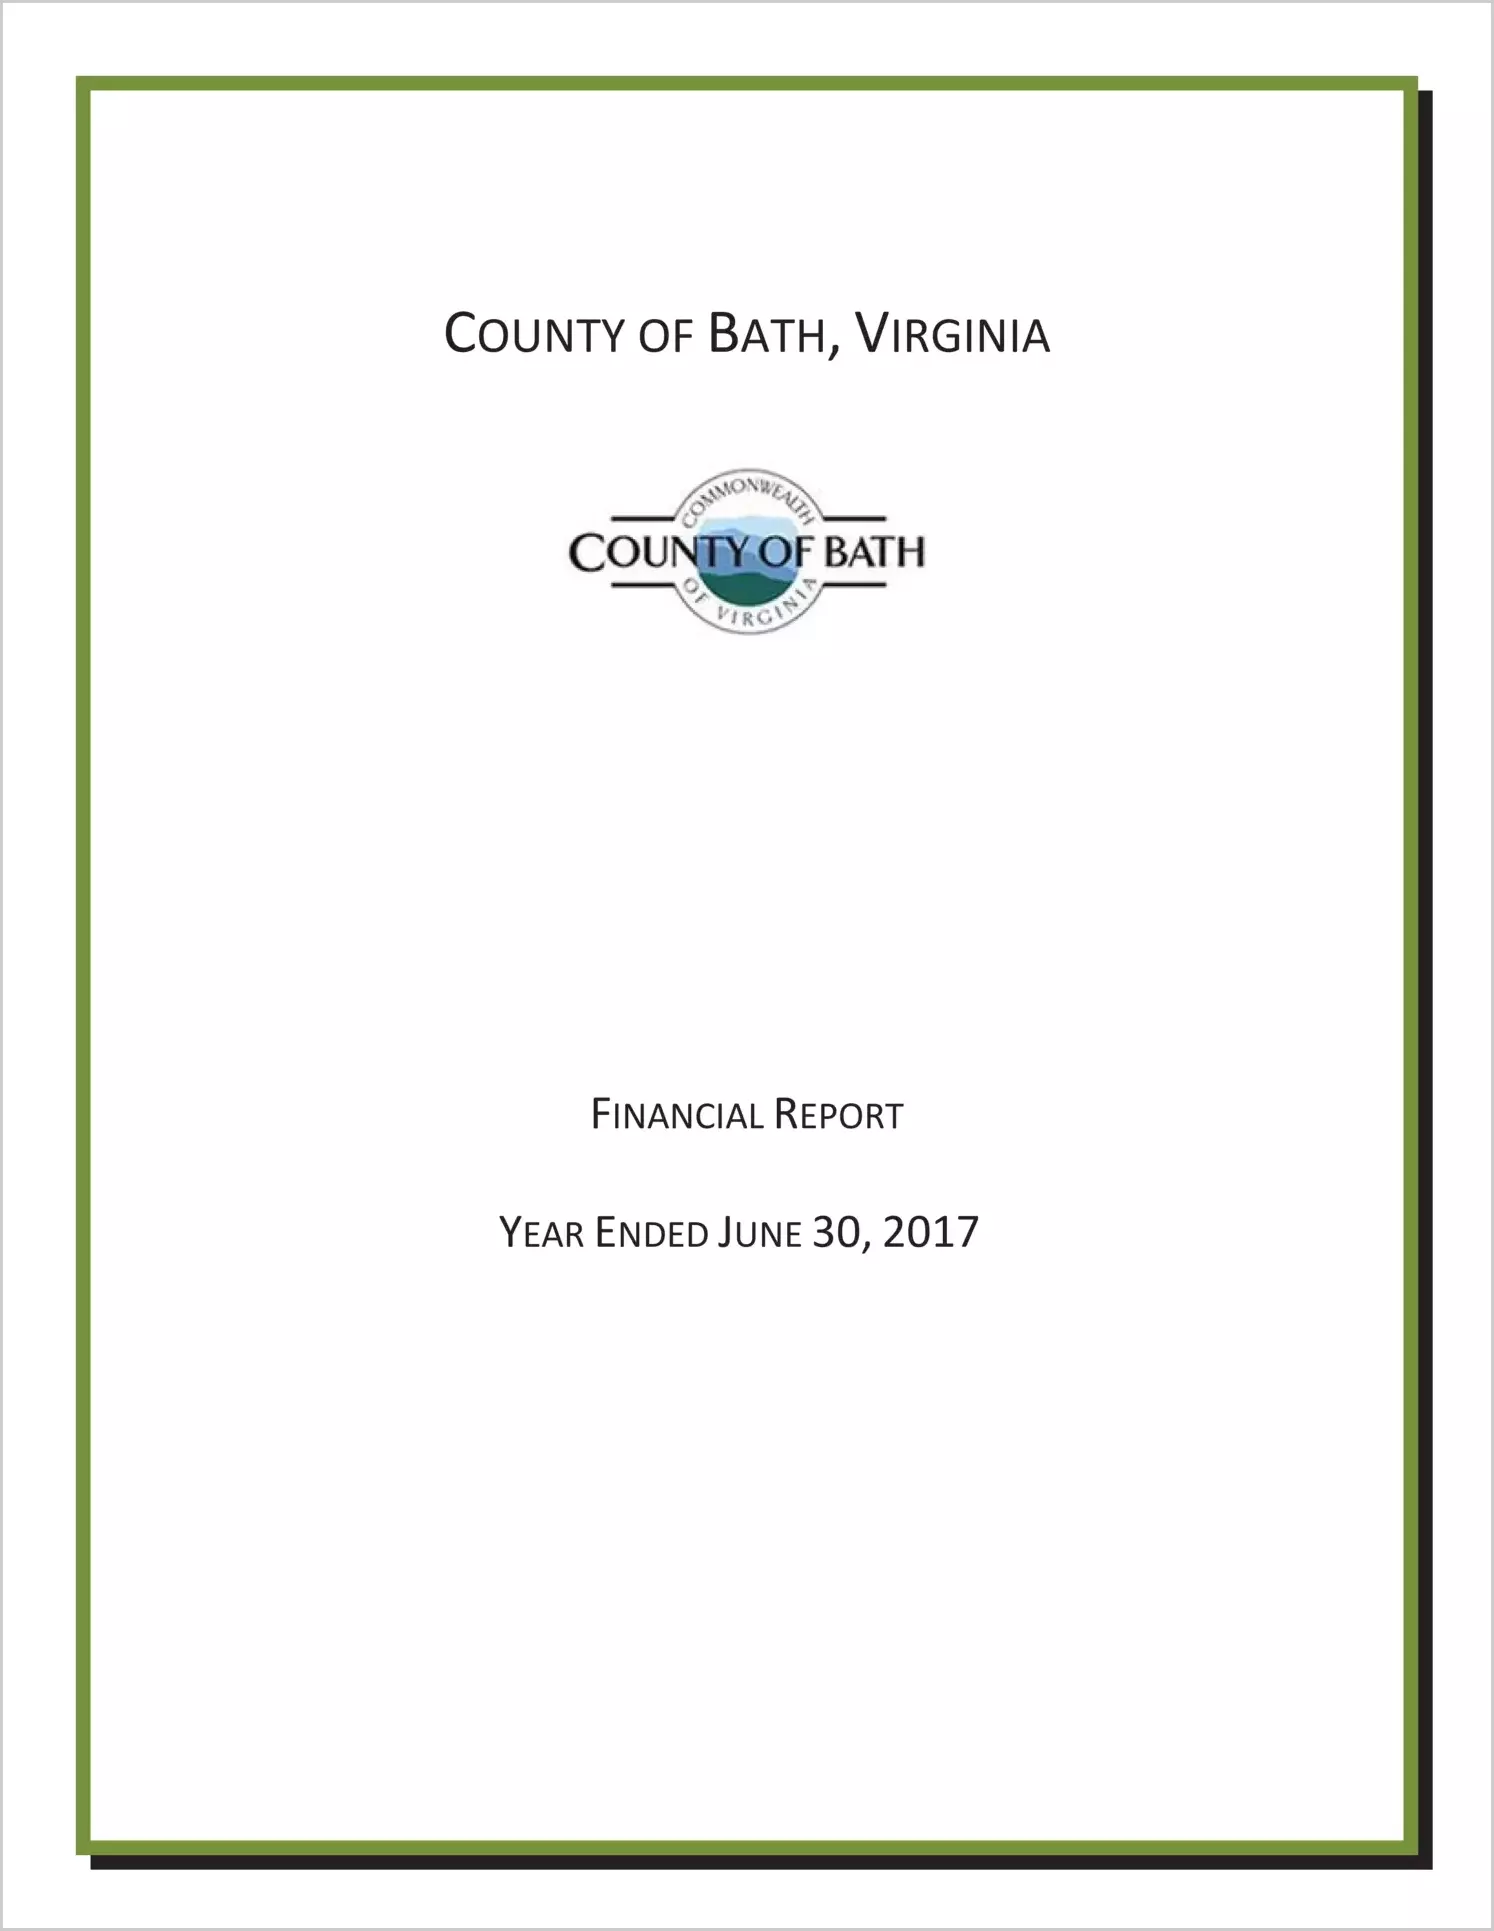 2017 Annual Financial Report for County of Bath